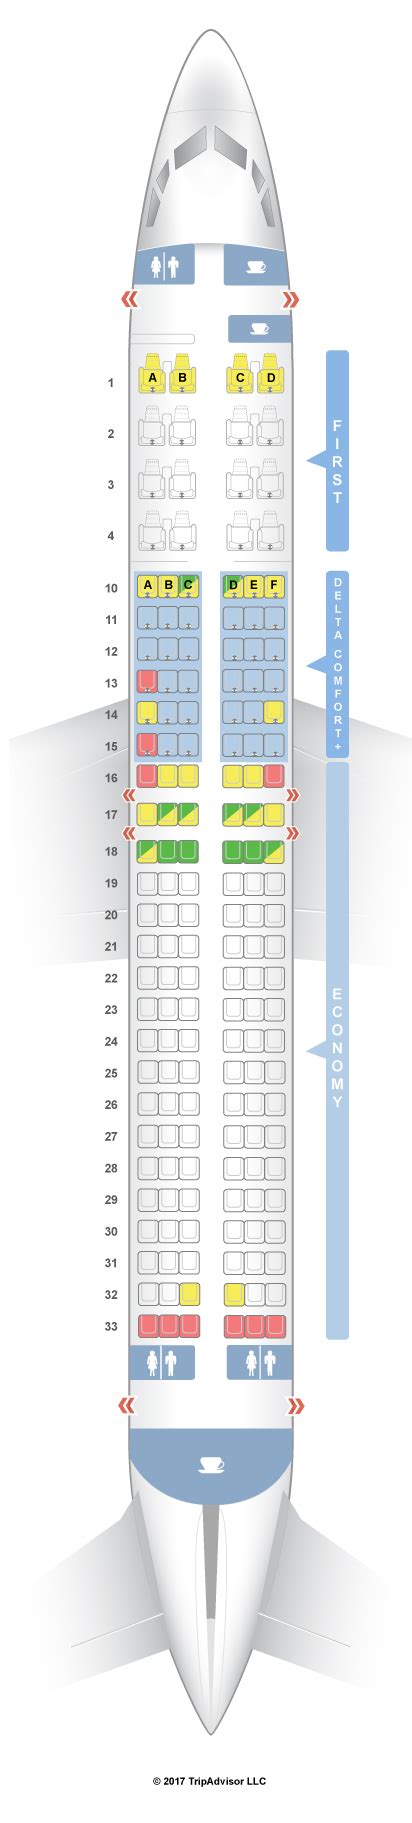 For your next Delta flight, use this seating chart to get the most comfortable seats, legroom, ... Boeing 737-700 (73W) Boeing 737-800 (73H) Boeing 737-900ER (739) Boeing 757-200 (757) Boeing 757-200 (75D) ... SeatGuru was created to help travelers choose the best seats and in-flight amenities. Forum; Mobile; FAQ;. 